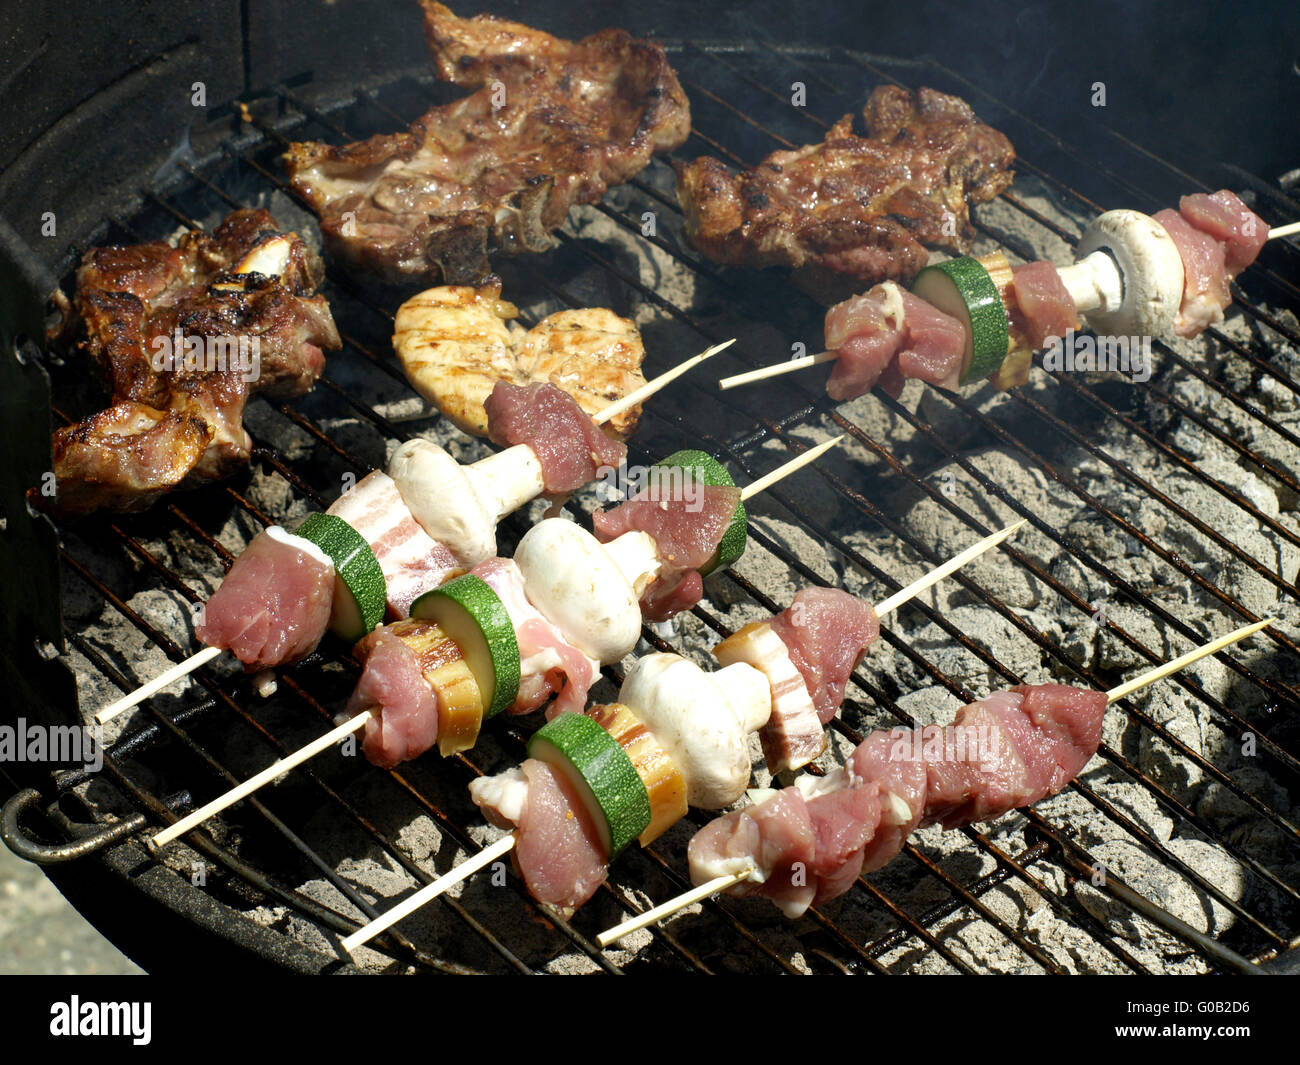 barbecue for family Stock Photo